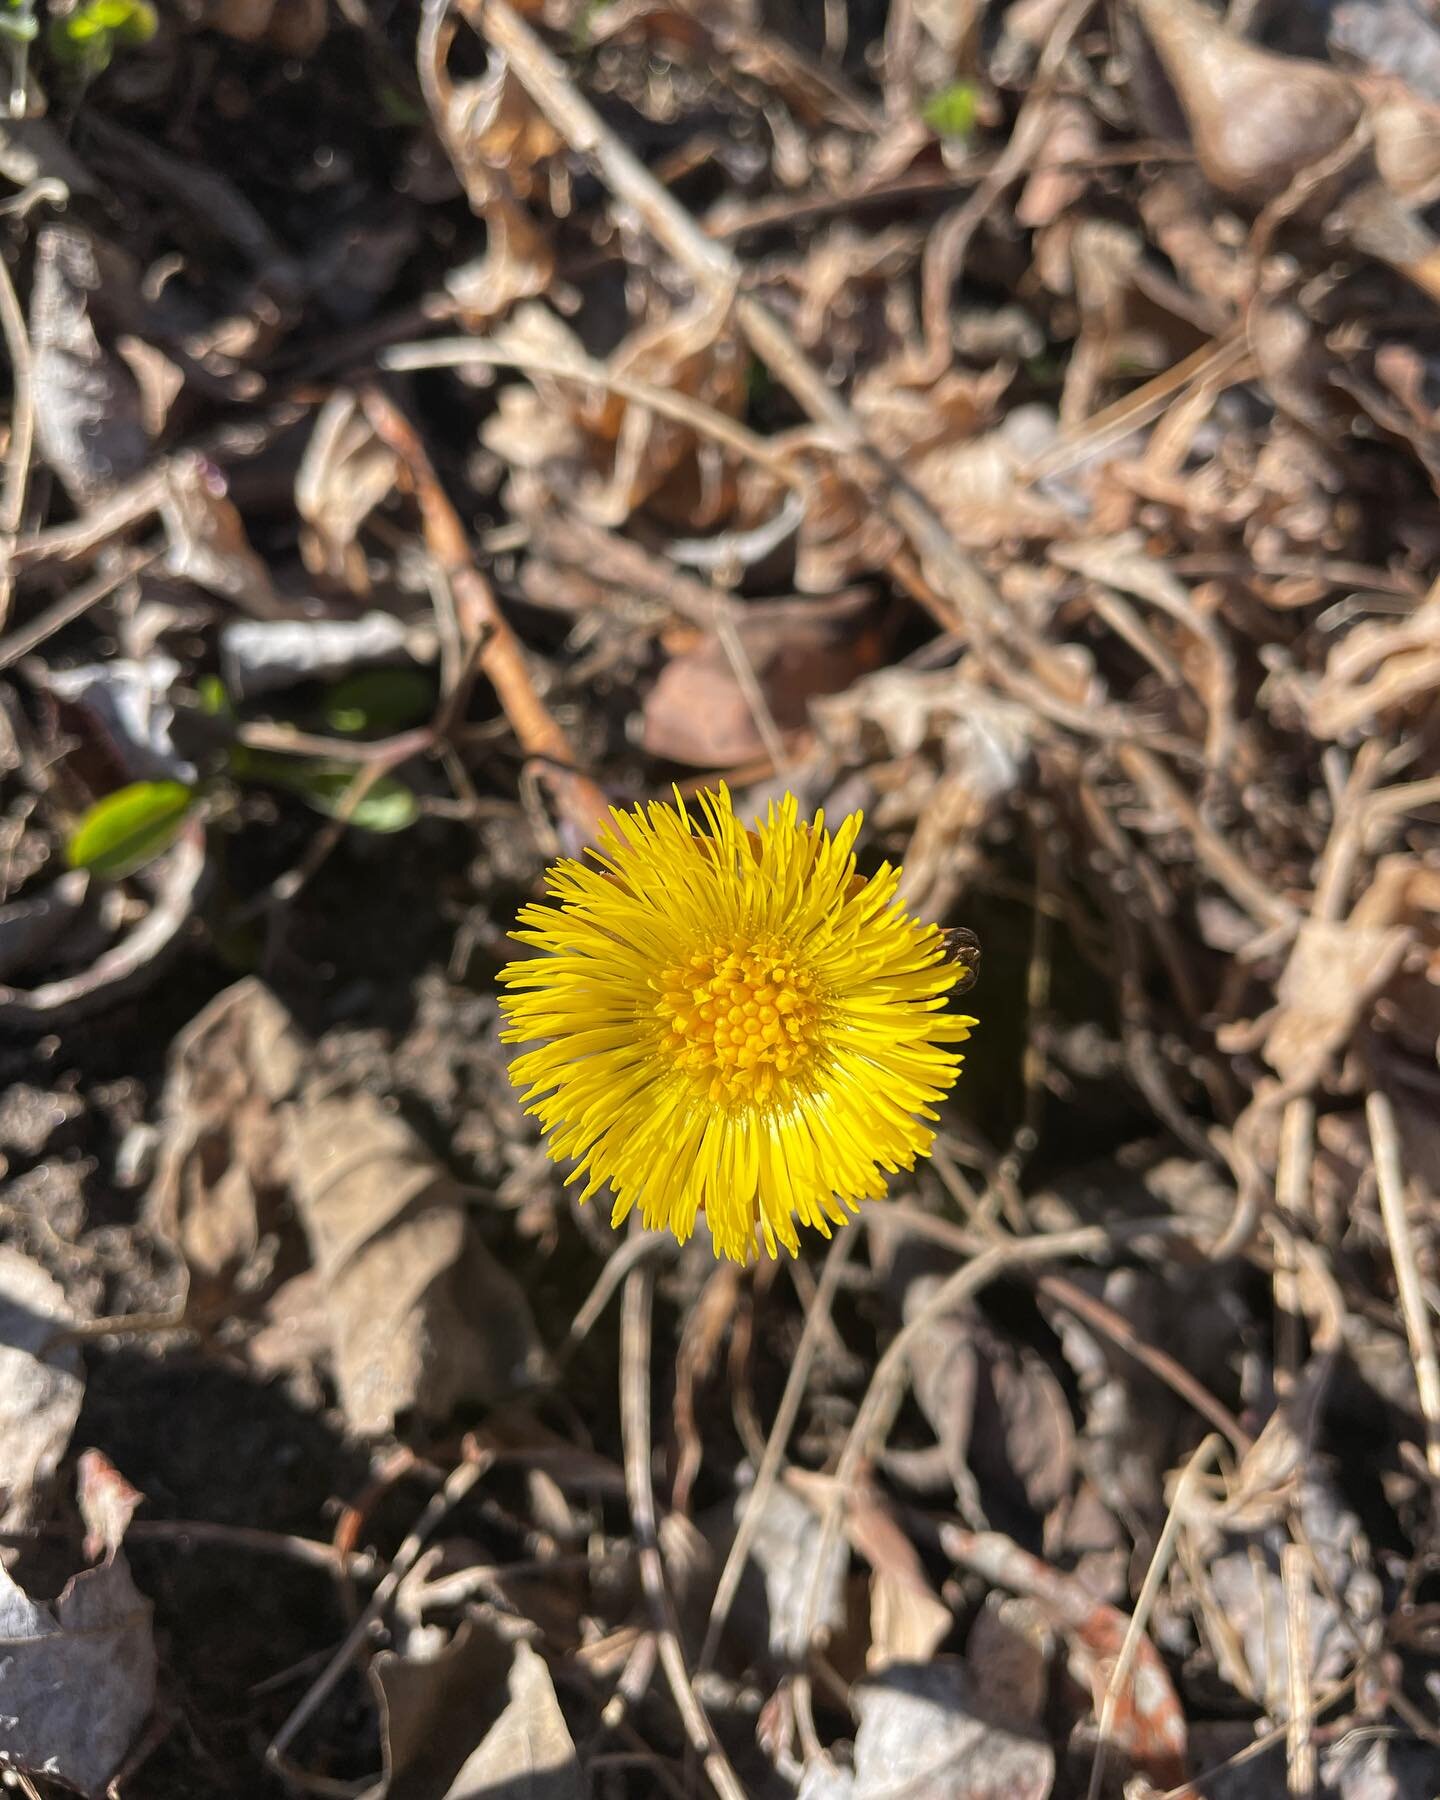 Spring things 🌿

The plants are popping and I&rsquo;ve scheduled a plant walk for Sunday, April 28th. 

Join me for a two hour guided walk where we will explore the edible and medicinal wild plants of spring, including the ones pictured here:

🌼Col